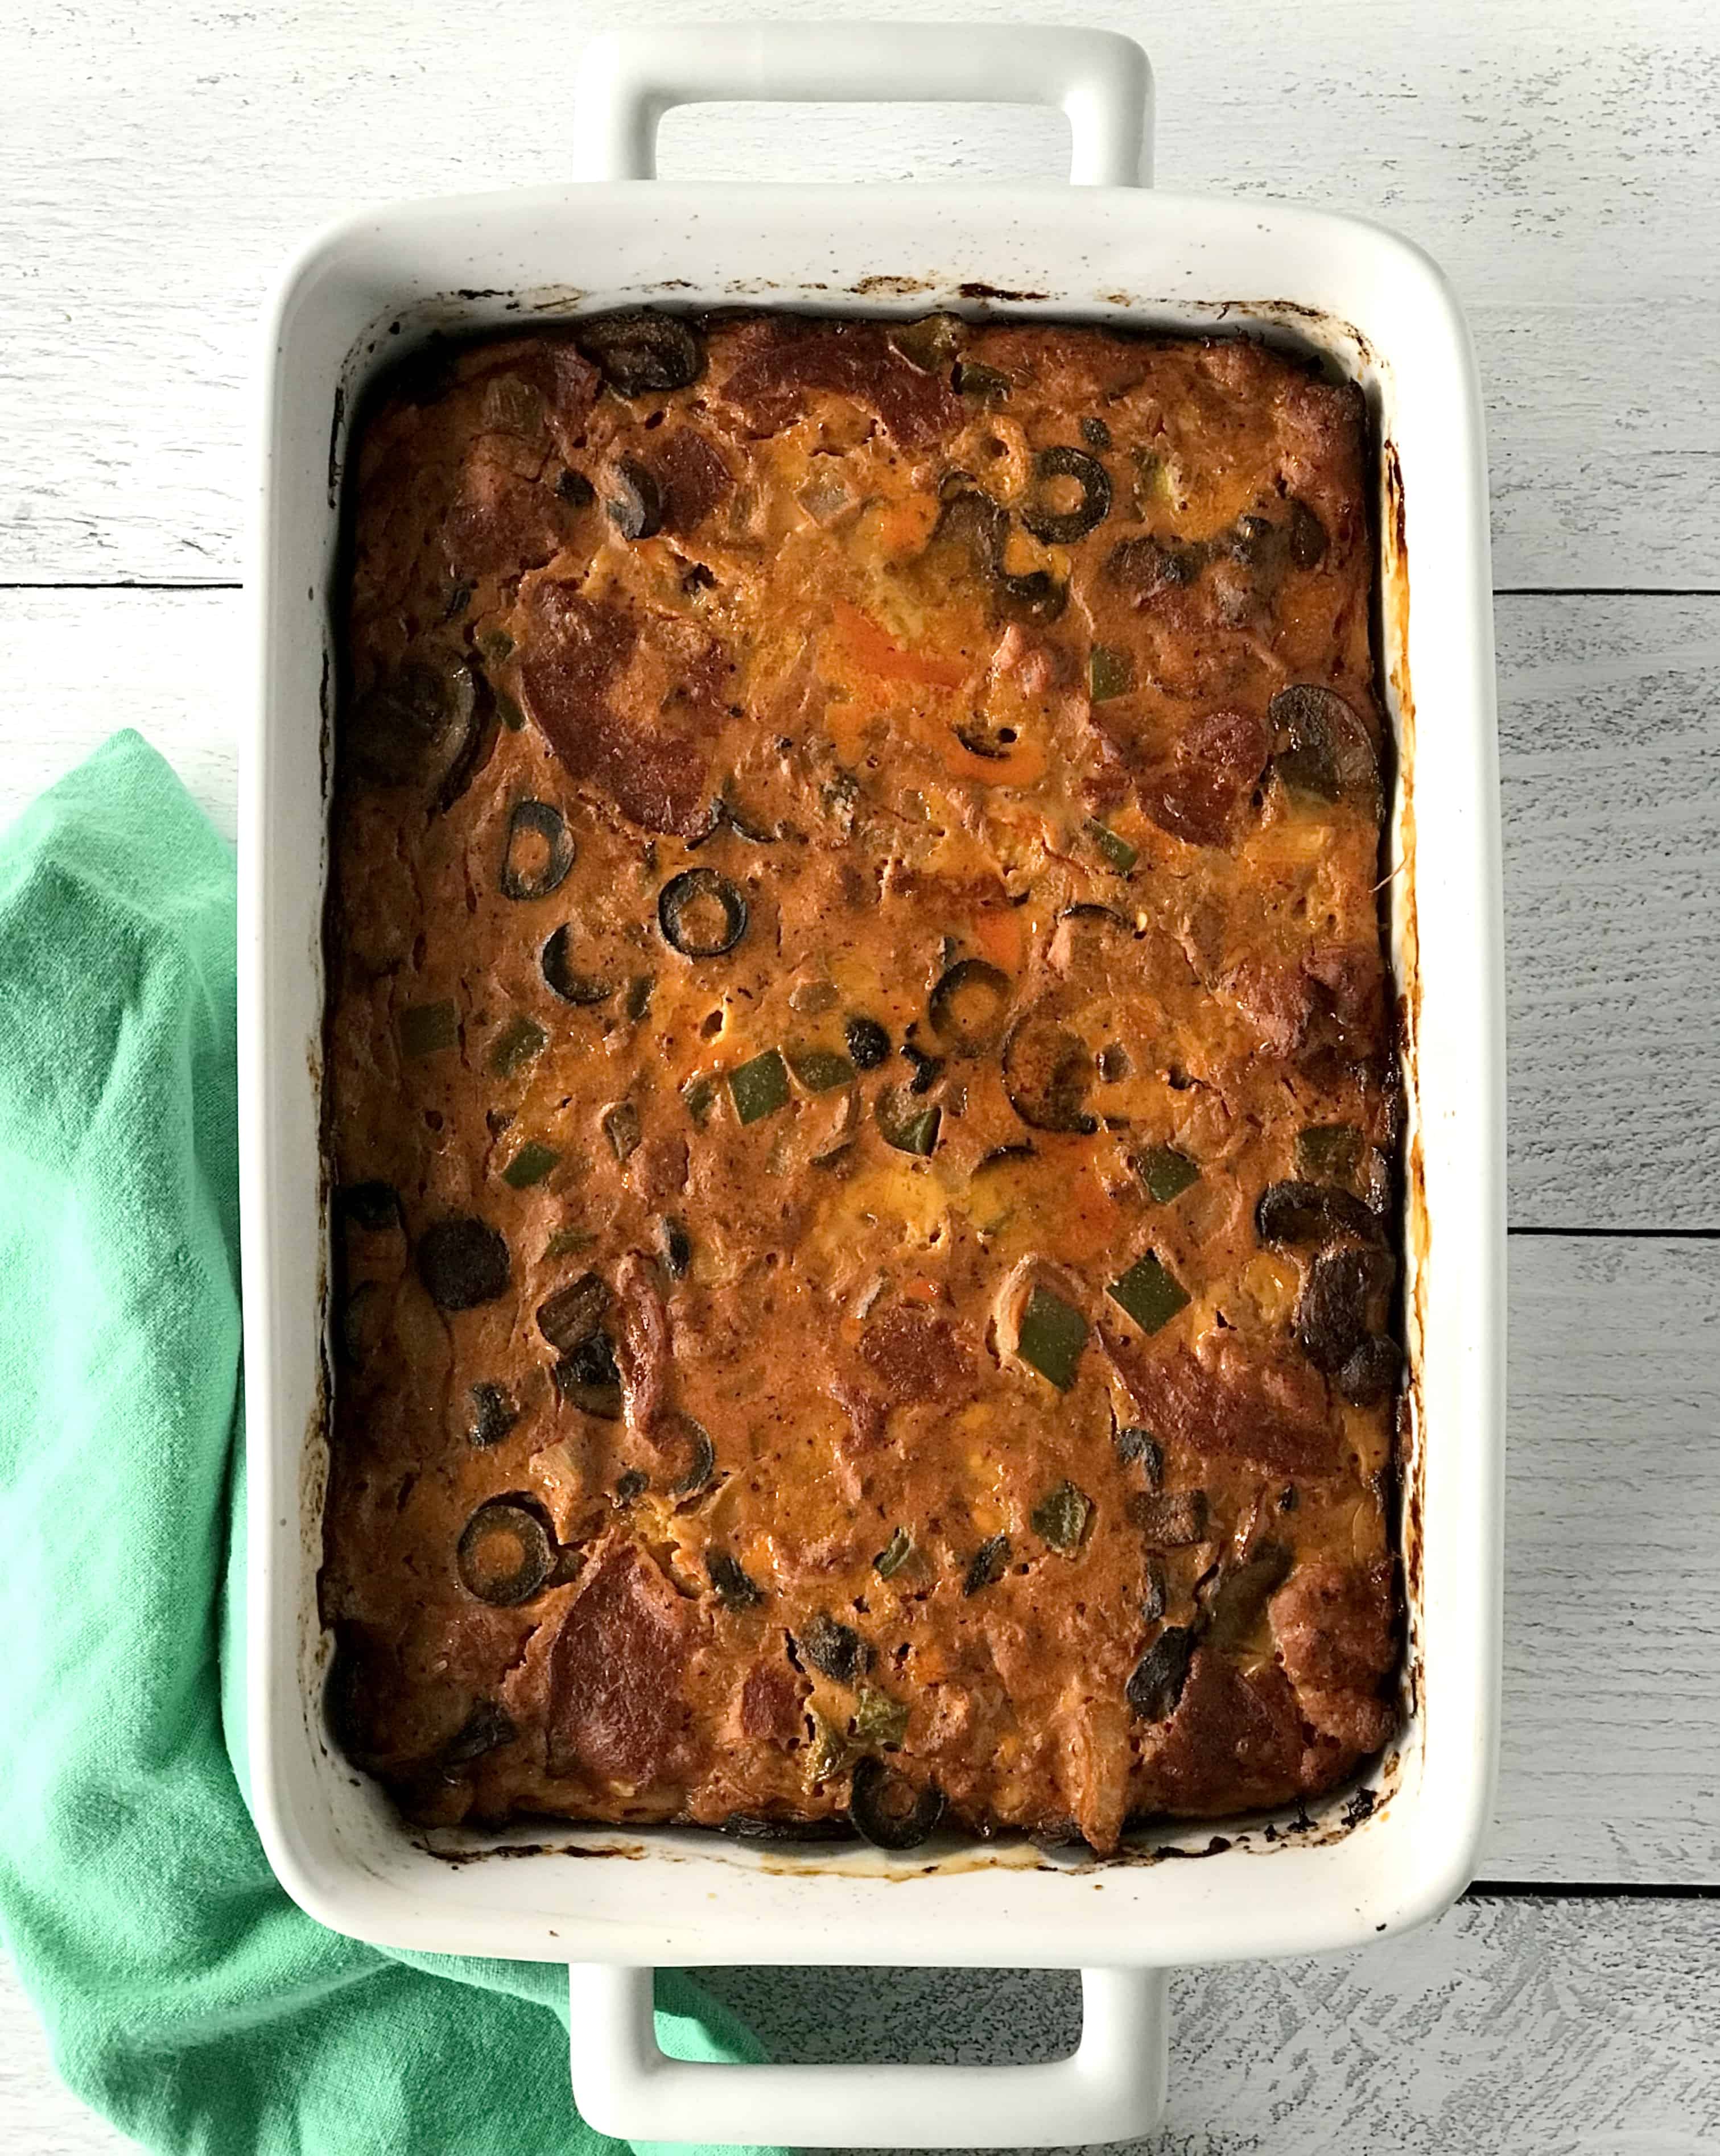 a healthy casserole in a white baking dish next to a green towel